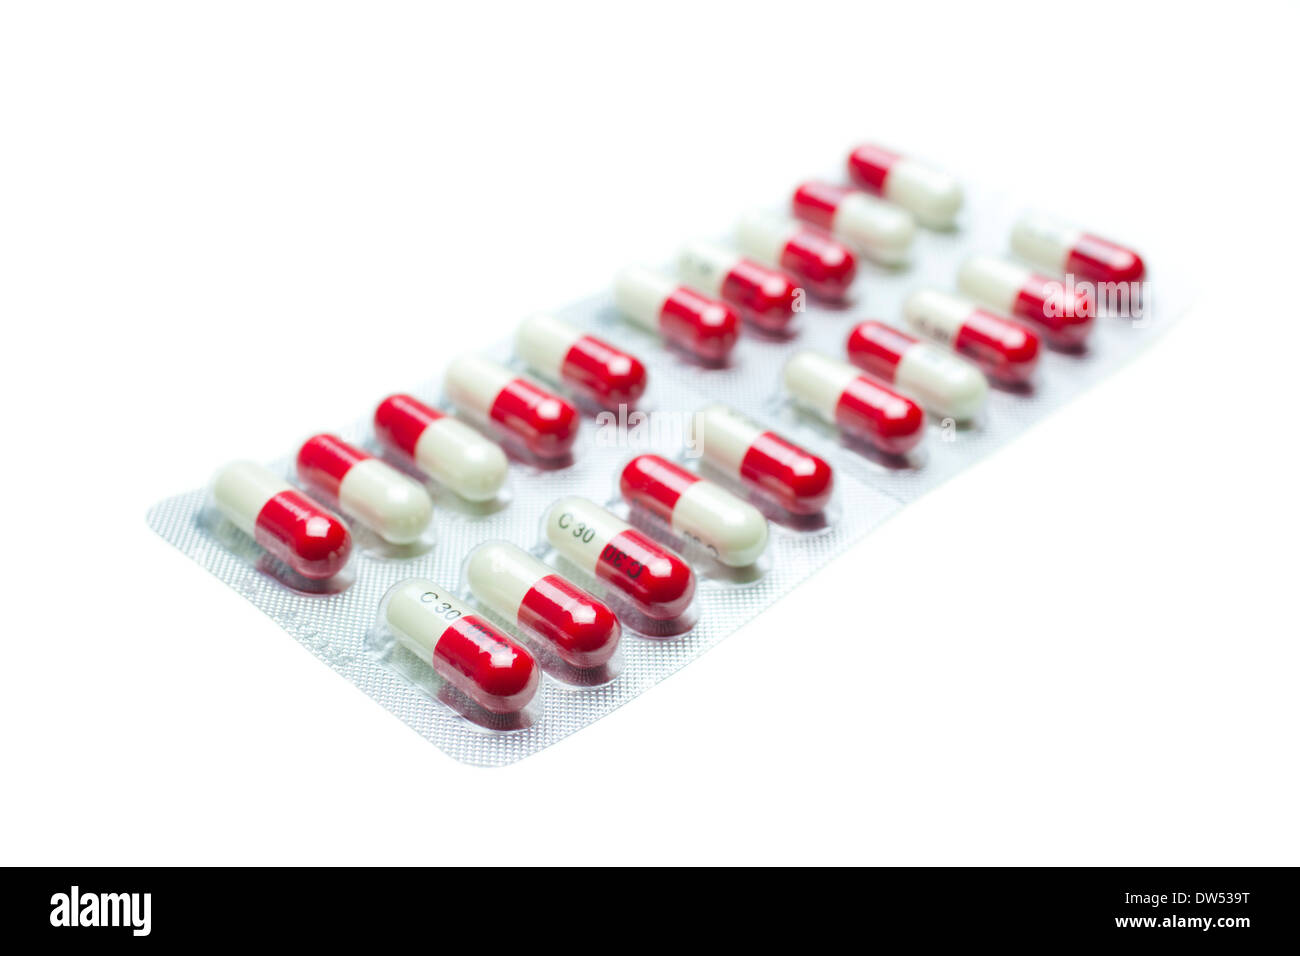 close up of a blister pack containing red and white capsules of a painkiller paracetamol and codeine on a white background Stock Photo